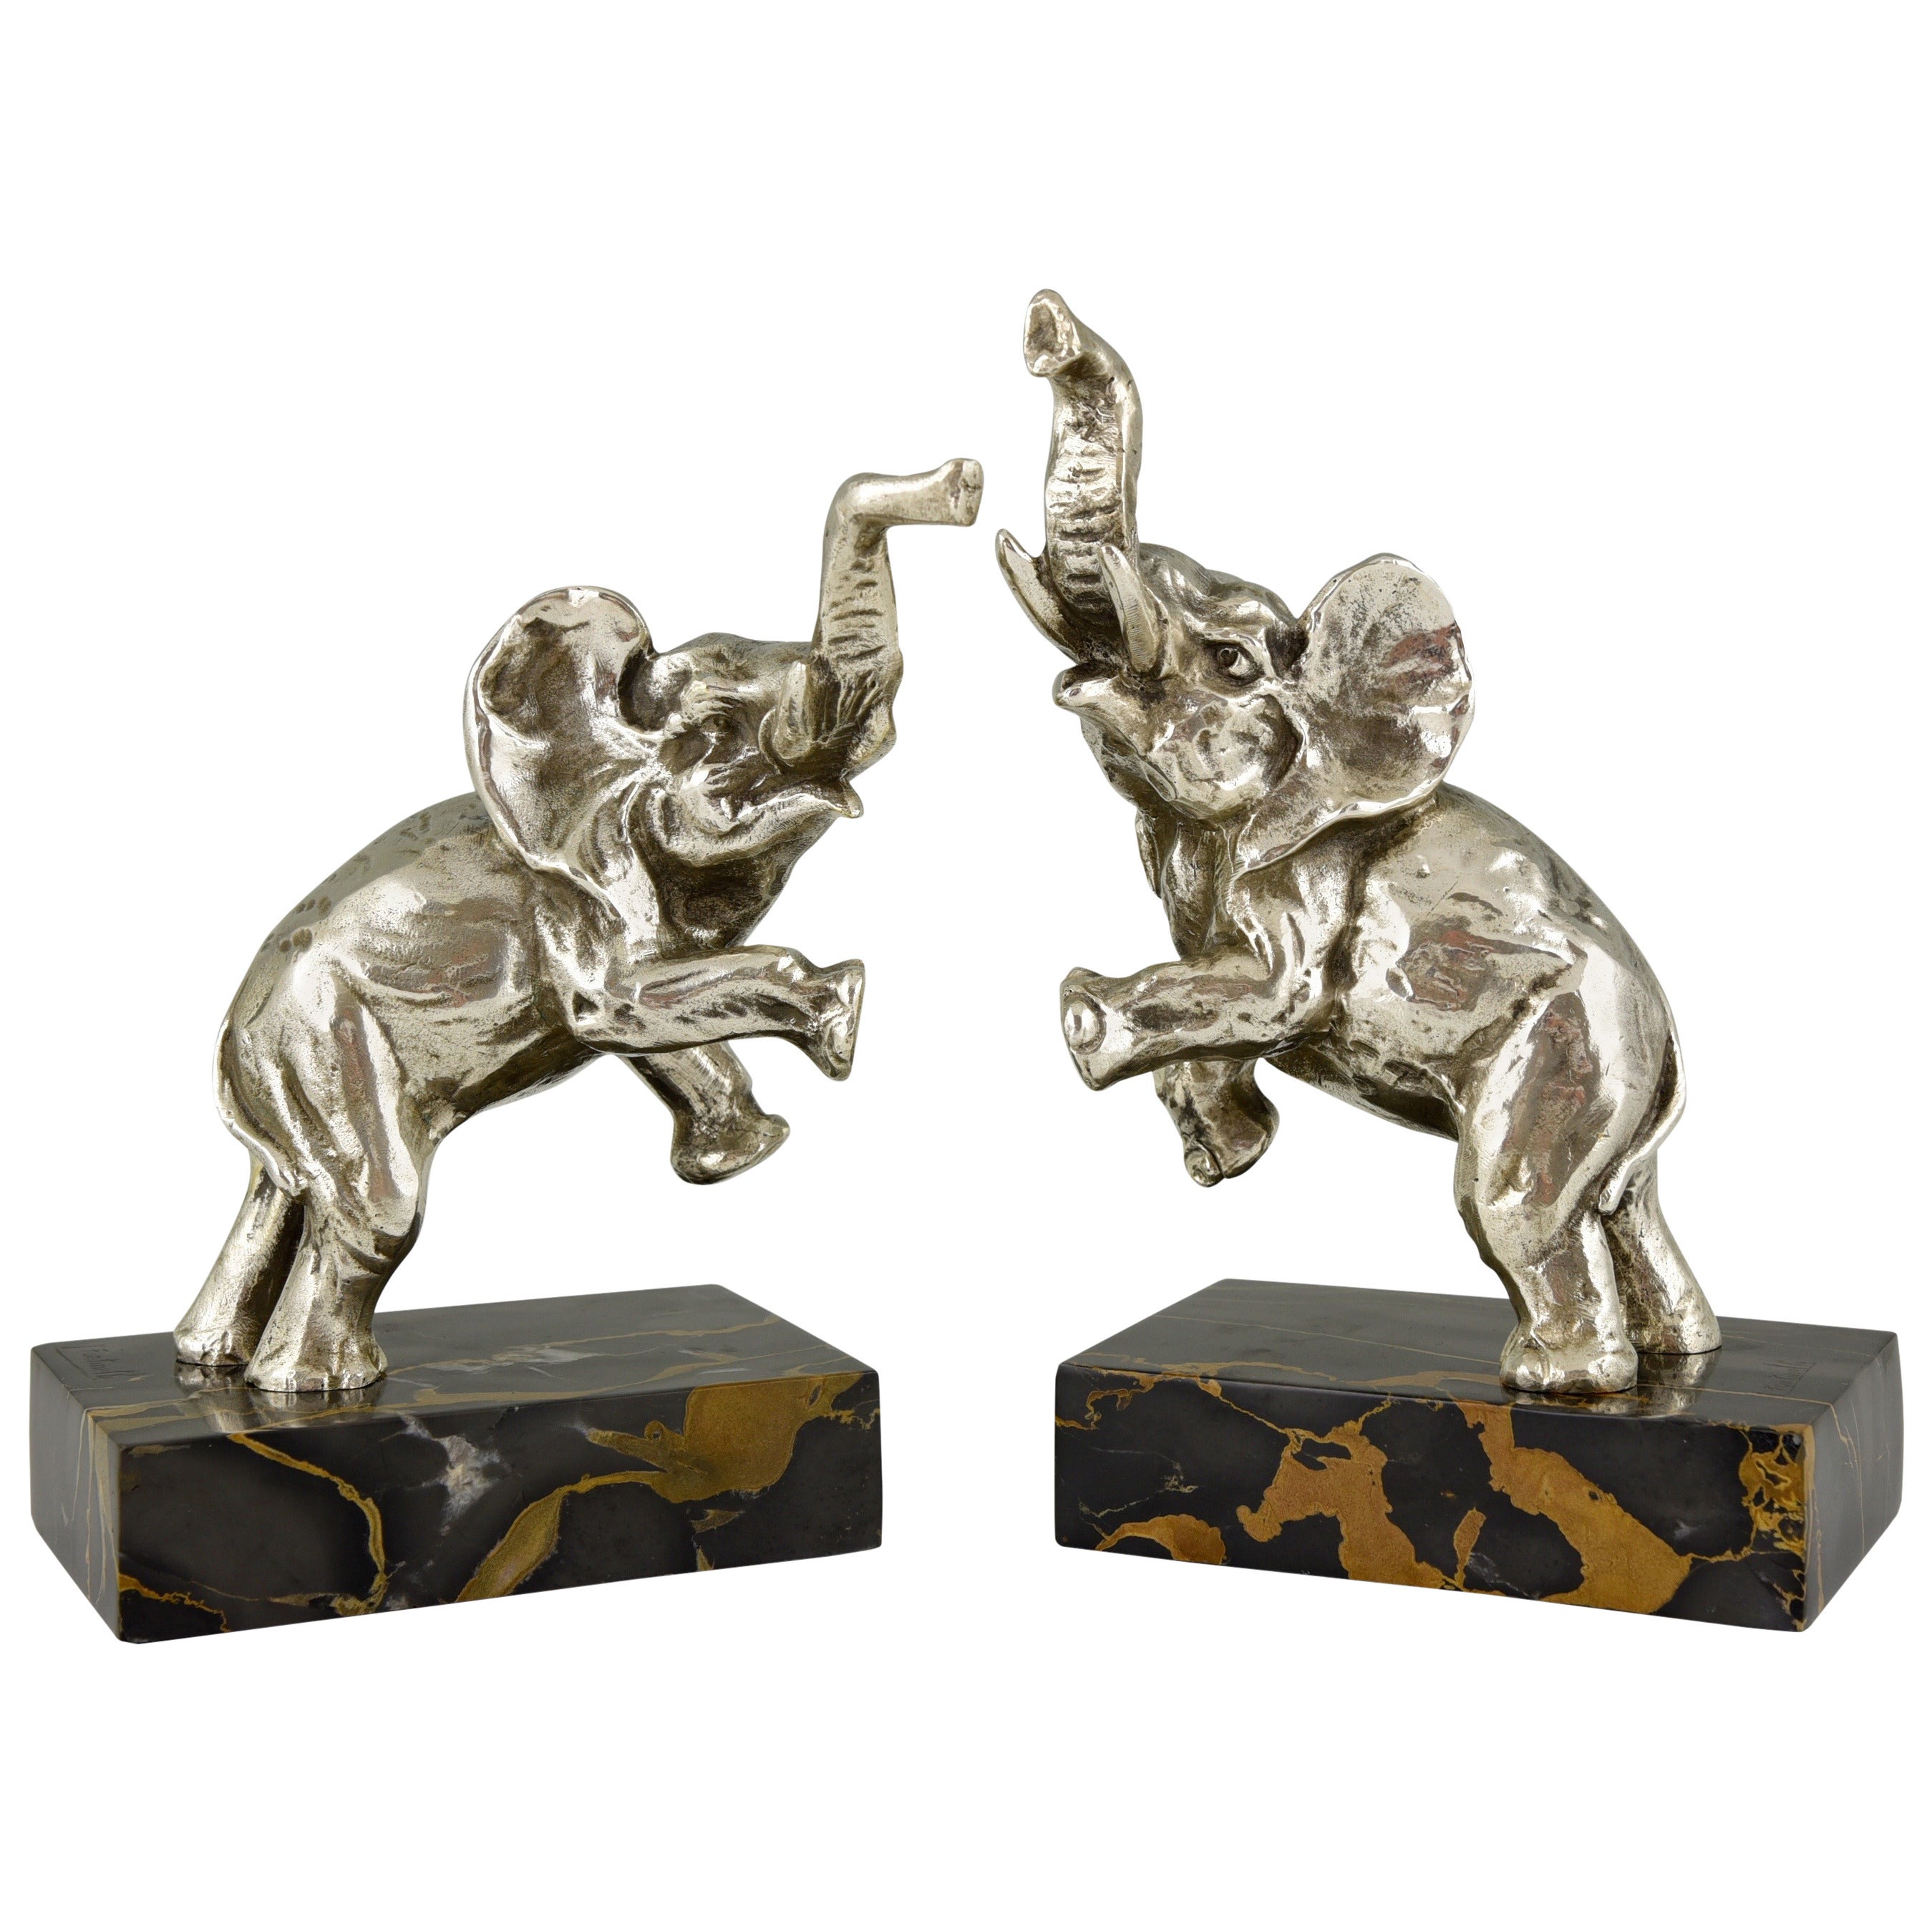 Art Deco silvered Bronze Elephant Bookends by Fontinelle, 1930 France